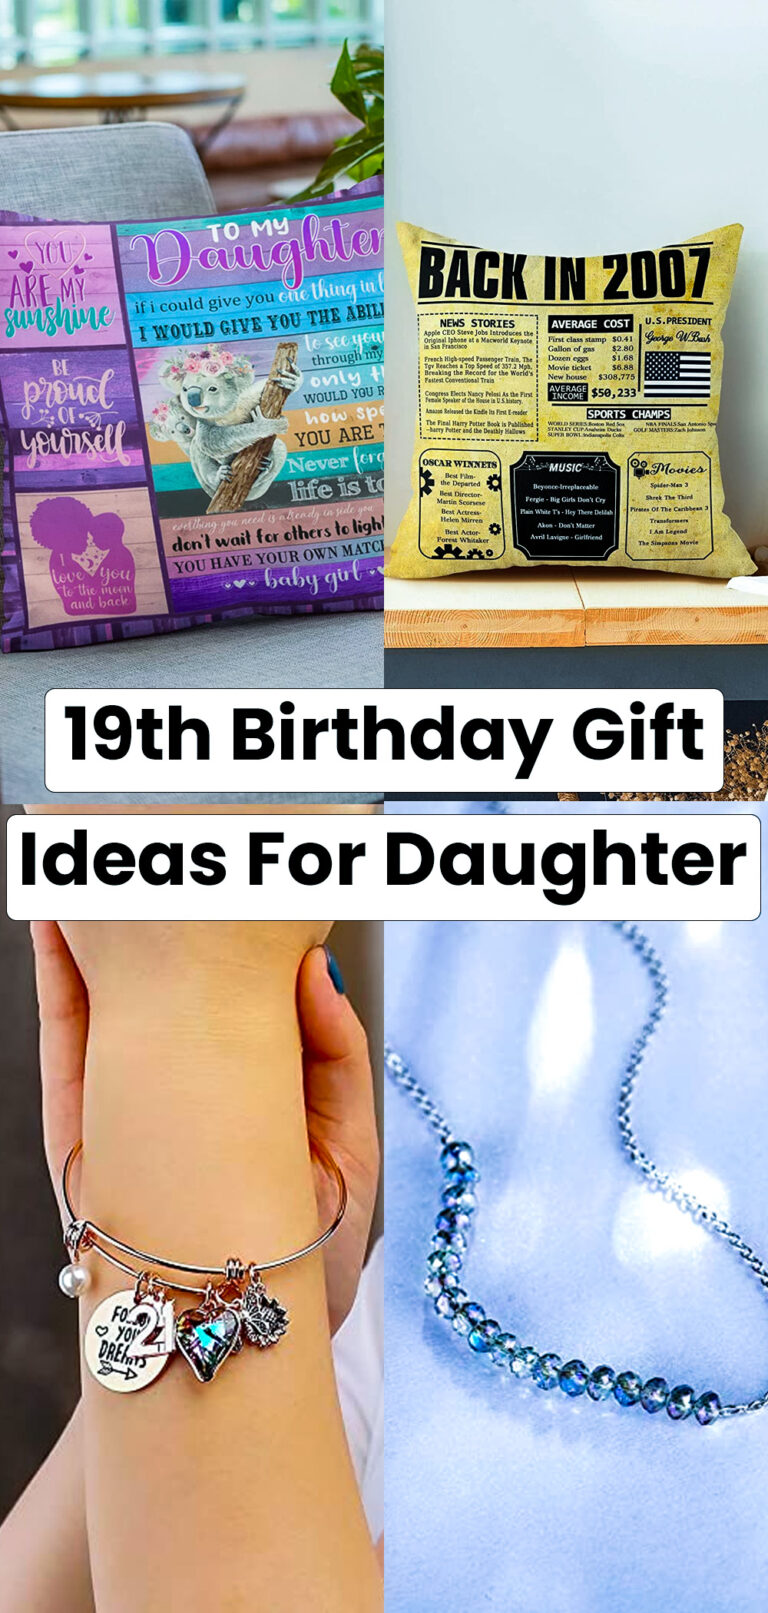 19th Birthday Gift Ideas for Daughter